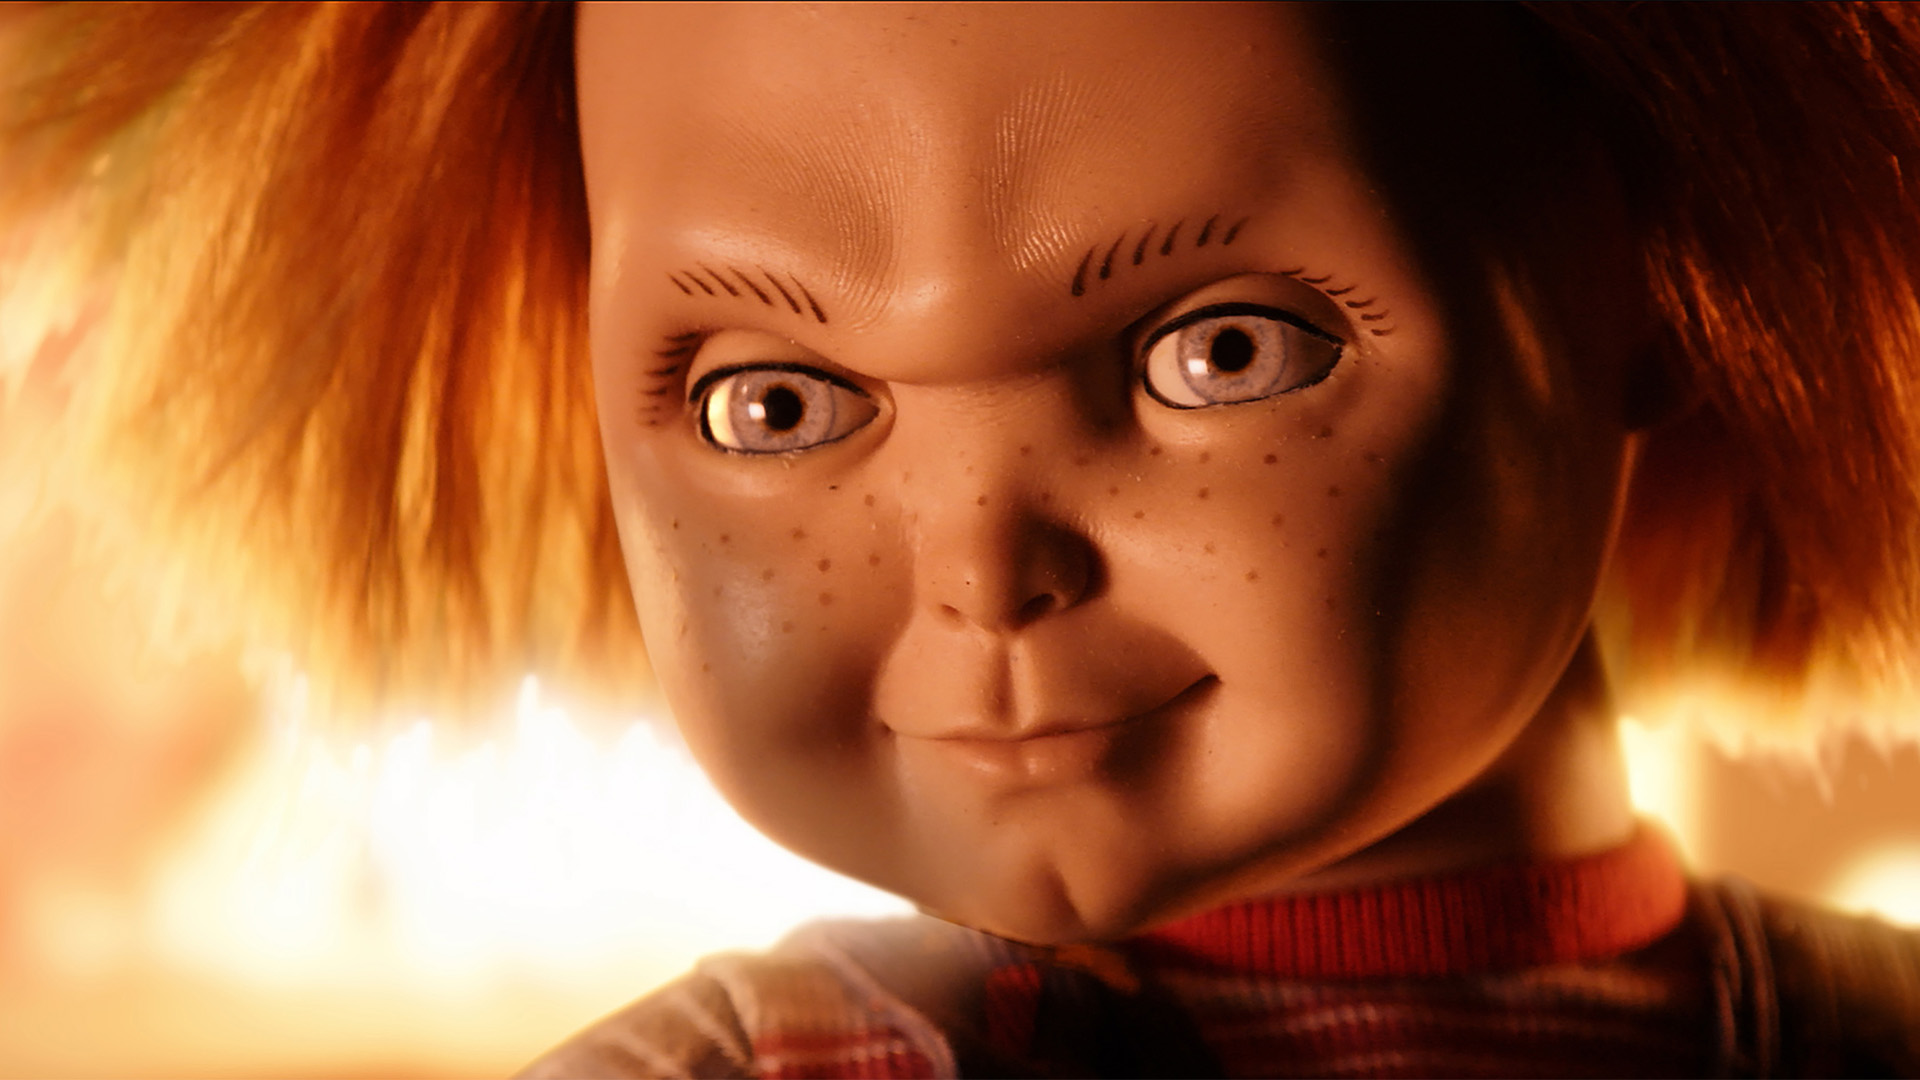 I Like to Be Hugged, Chucky reminisces about his first murder, urging Jake to make a choice-kill or be killed., TV-MA, Season 1061282, Episode 3